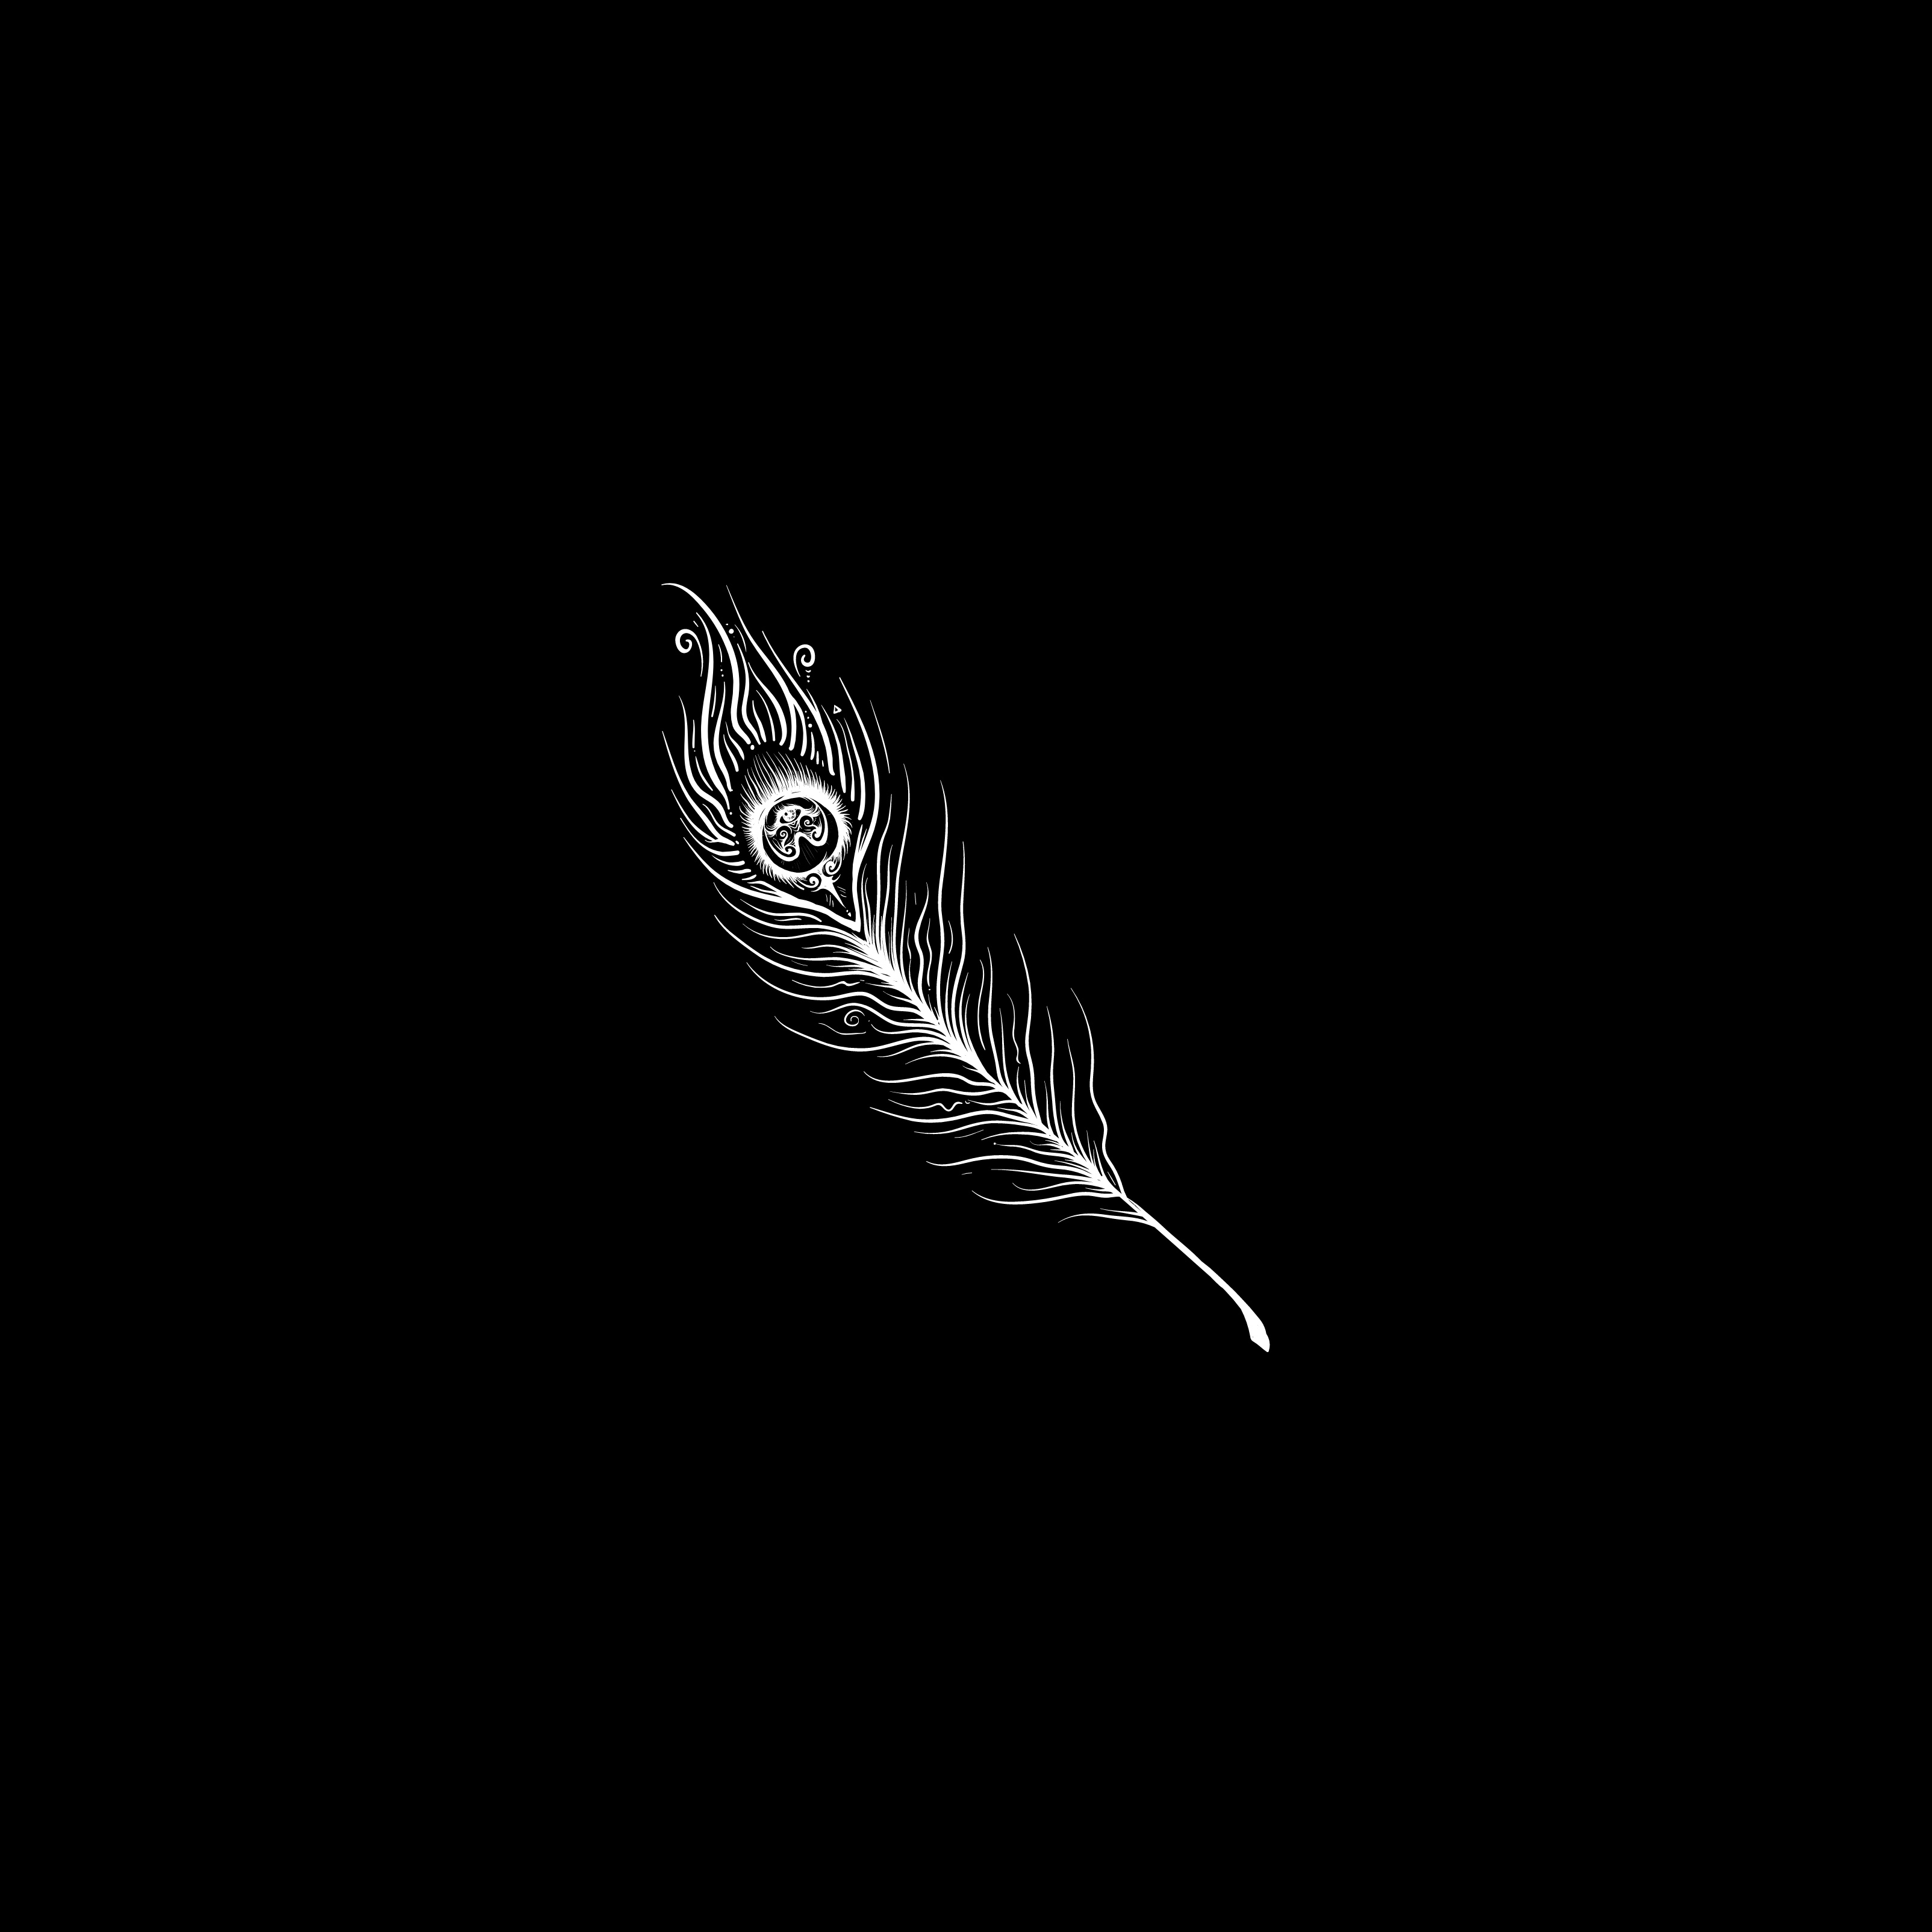 Peacock Feather White Black Background iPad Wallpaper